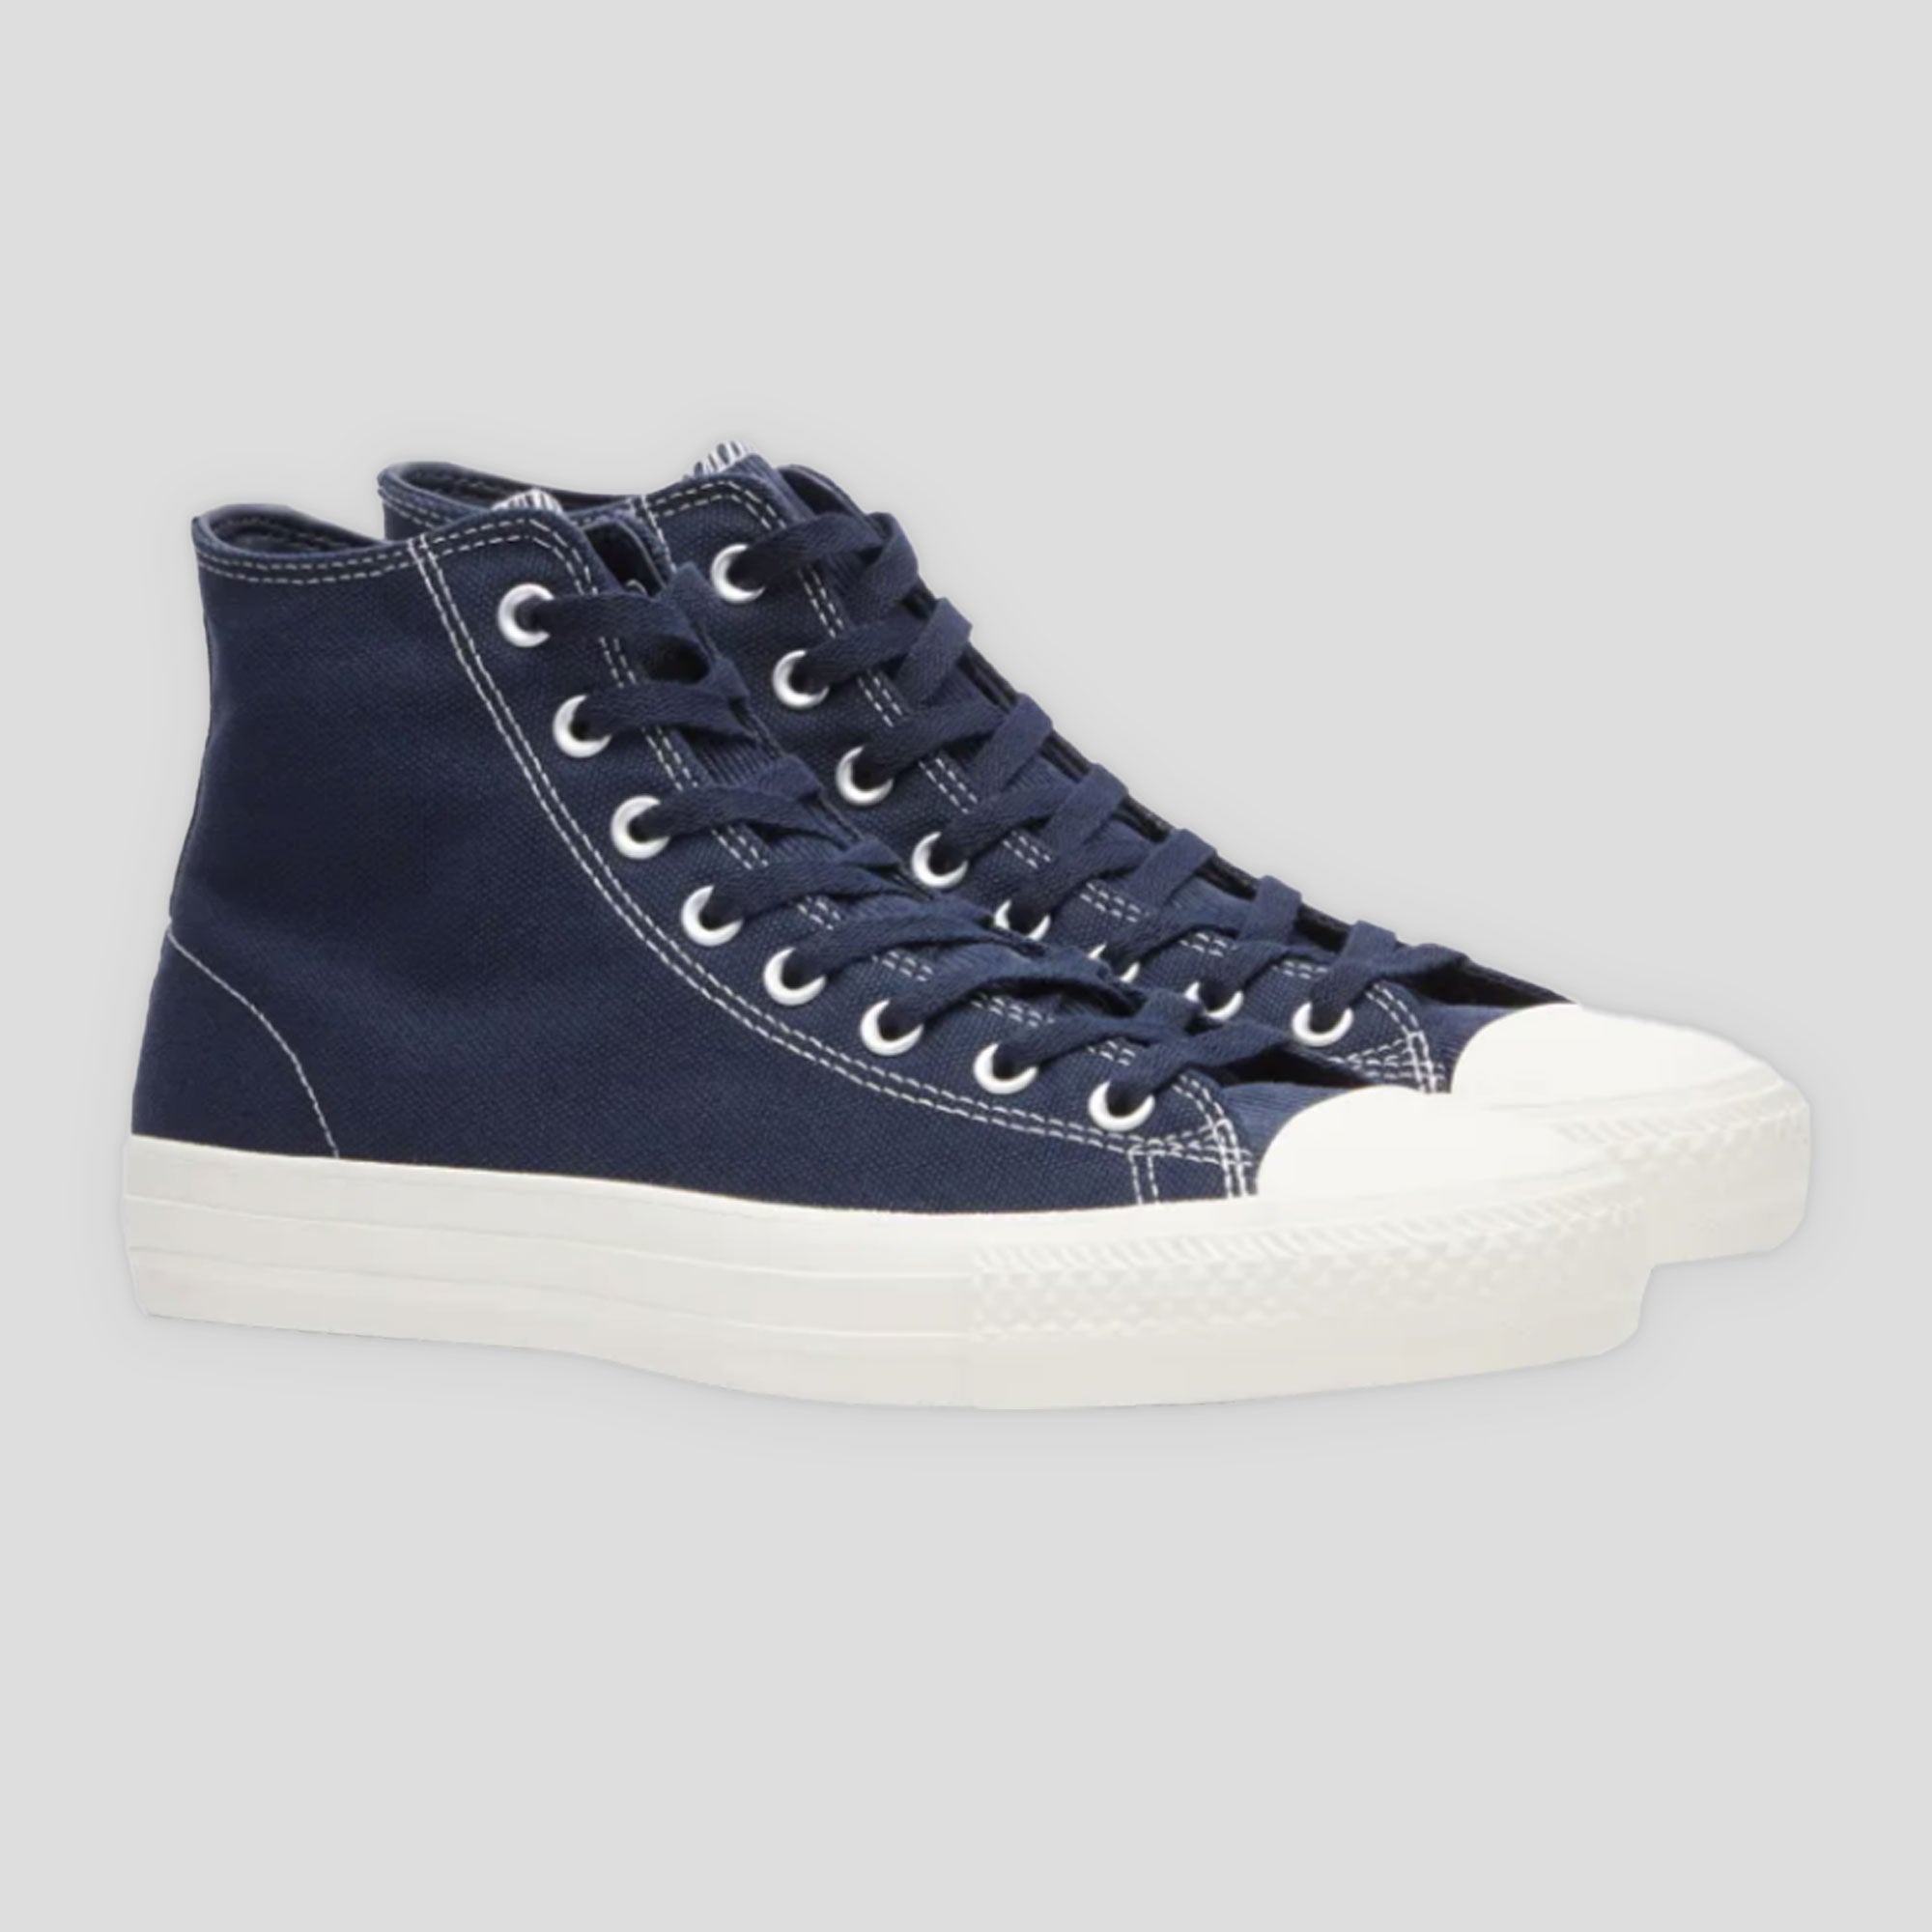 Converse Cons Chuck Taylor All Star Pro High Top - Obsidian Navy / White